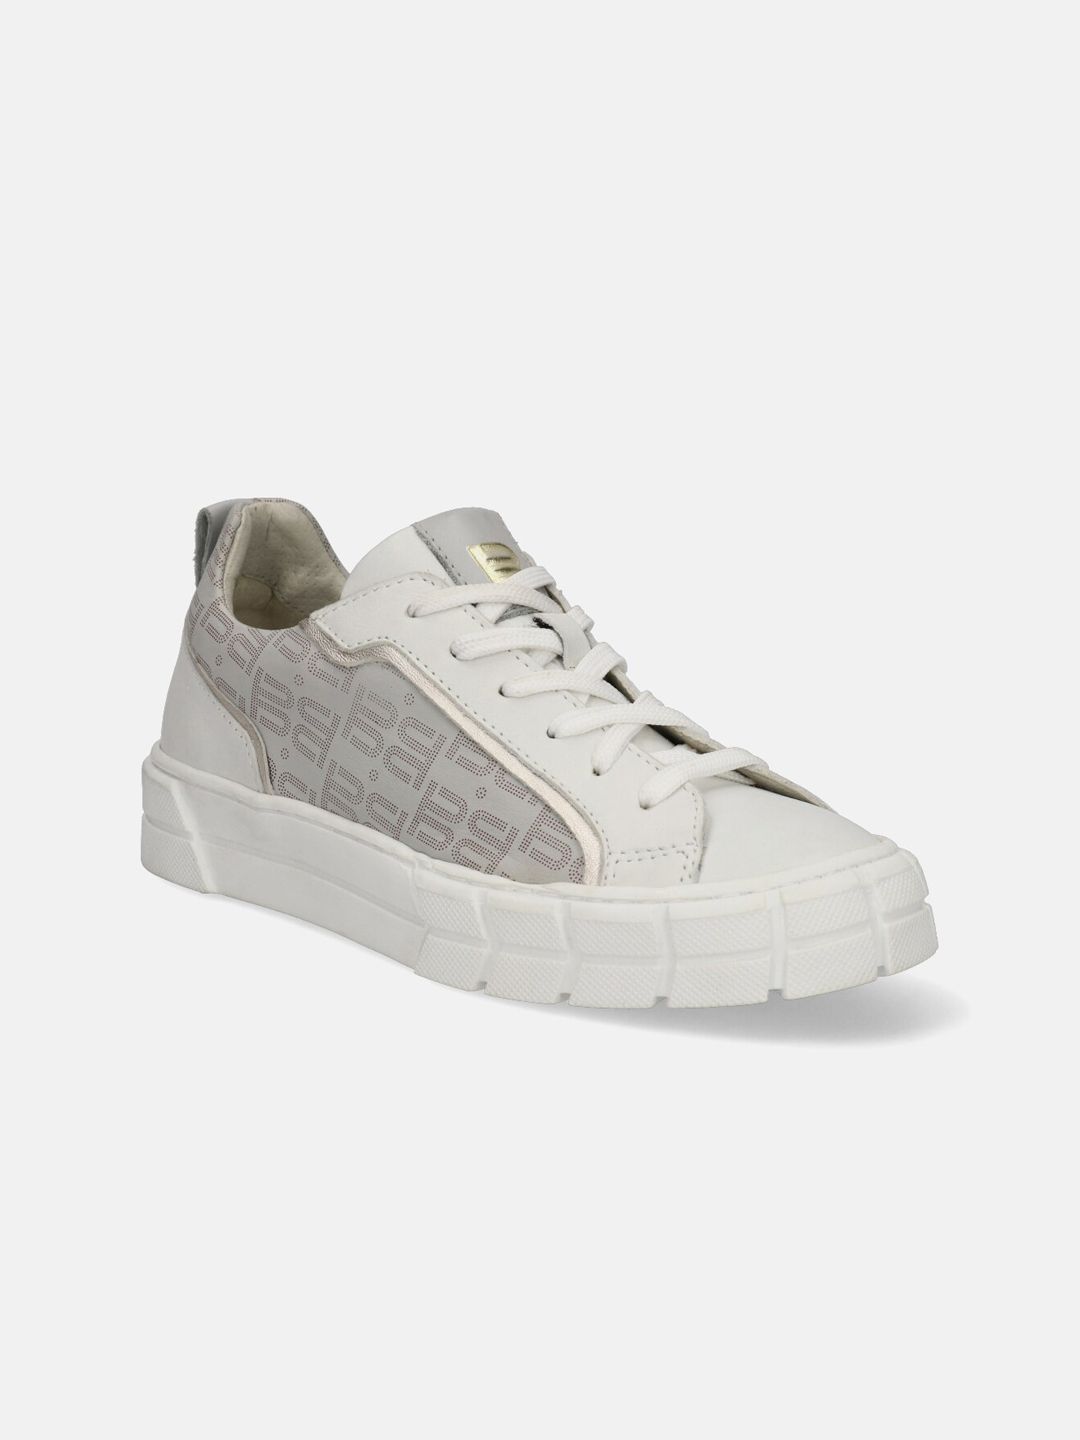 BAGATT Women White Textured Leather Sneakers Price in India